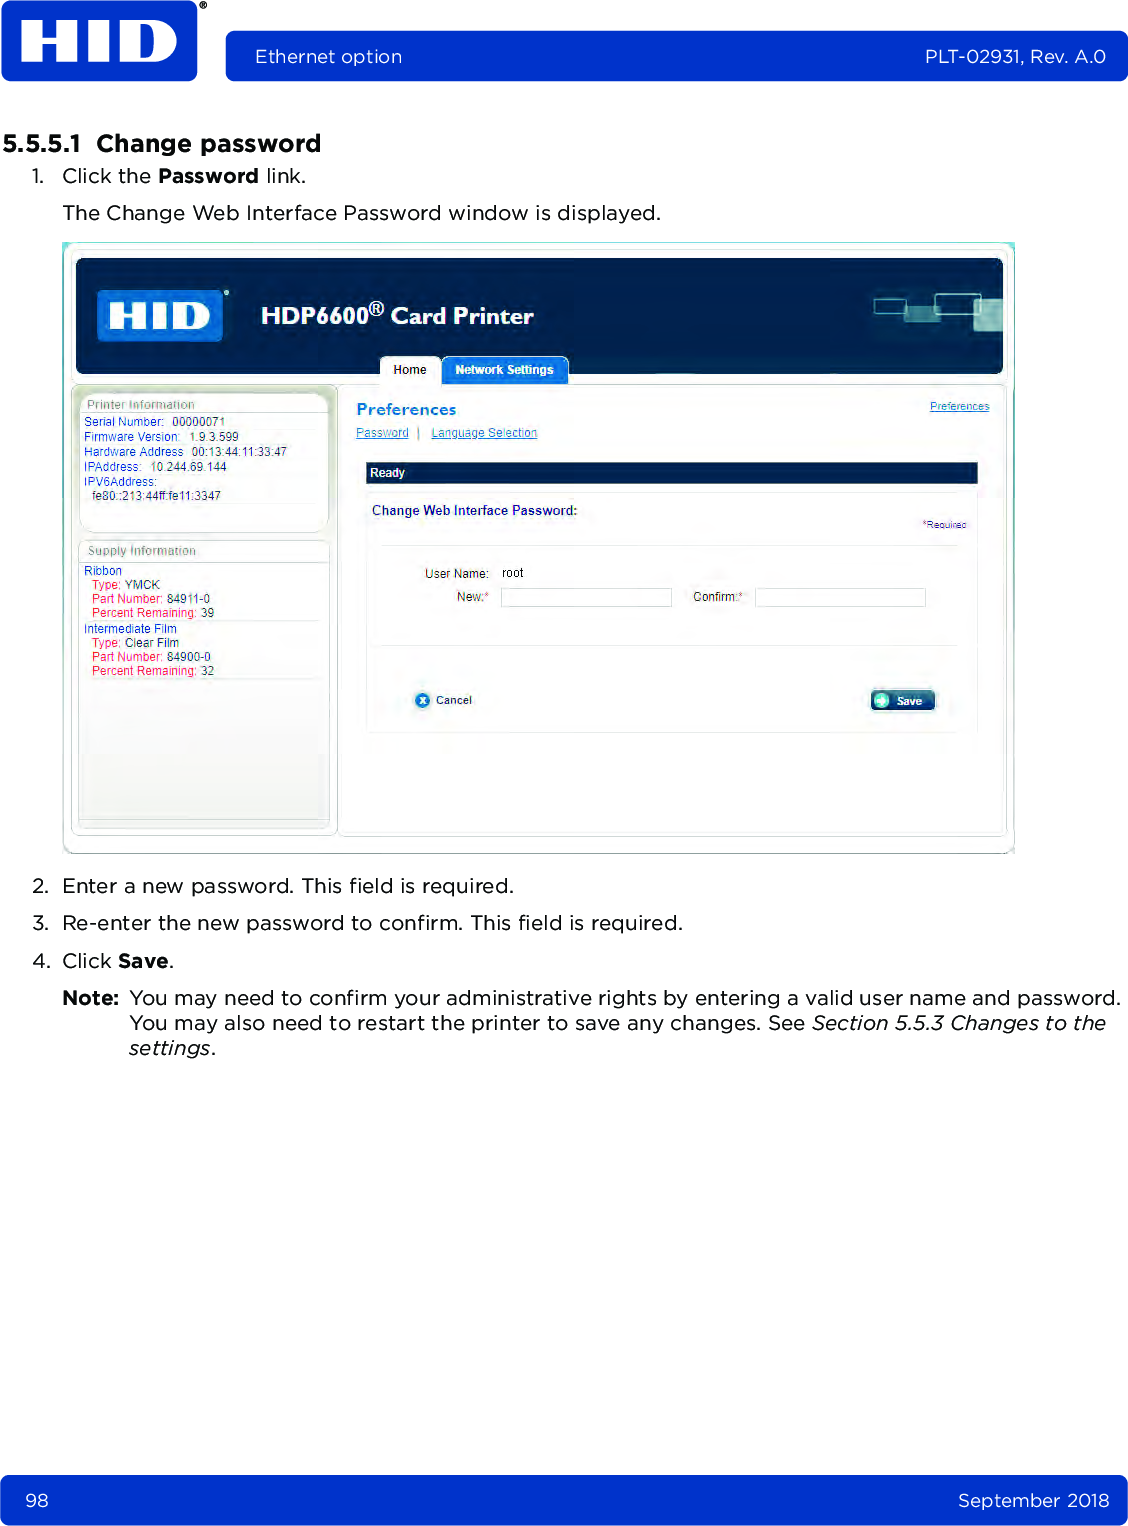 98 September 2018Ethernet option PLT-02931, Rev. A.05.5.5.1  Change password1. Click the Password link. The Change Web Interface Password window is displayed. 2. Enter a new password. This field is required.3. Re-enter the new password to confirm. This field is required.4. Click Save.Note: You may need to confirm your administrative rights by entering a valid user name and password. You may also need to restart the printer to save any changes. See Section 5.5.3 Changes to the settings.